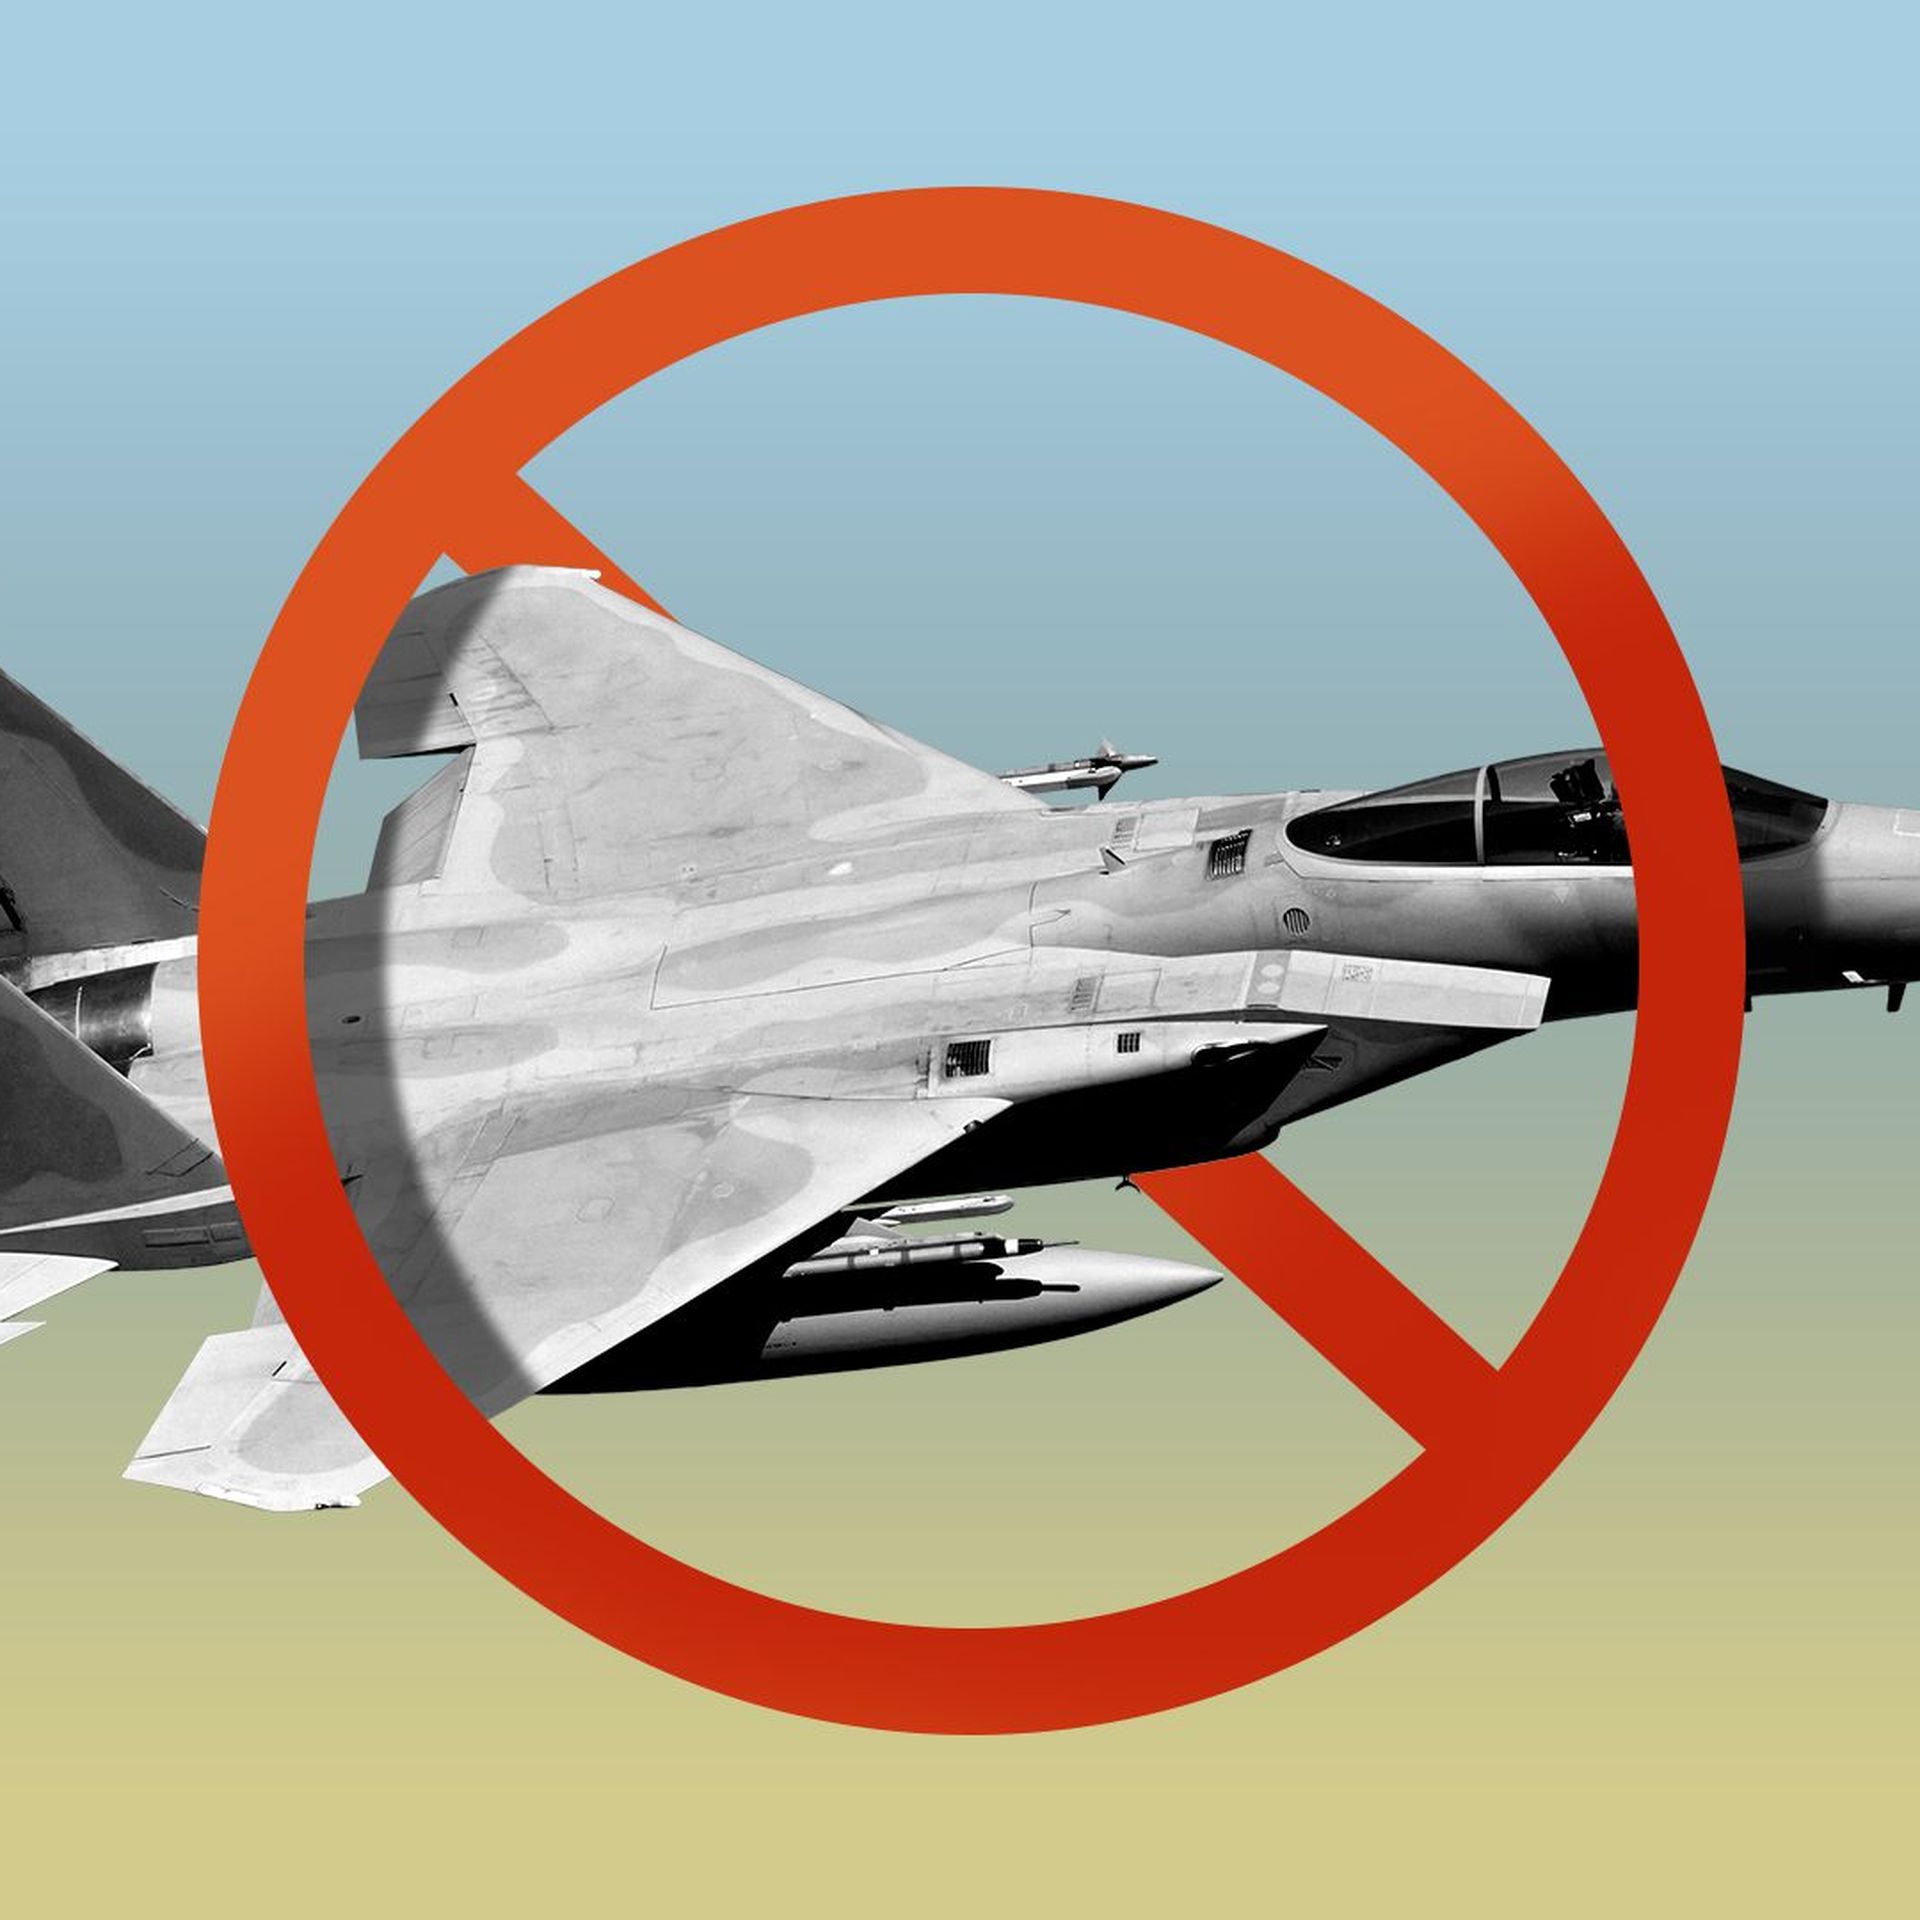 Illustration of a airplane with a "no" sign around it